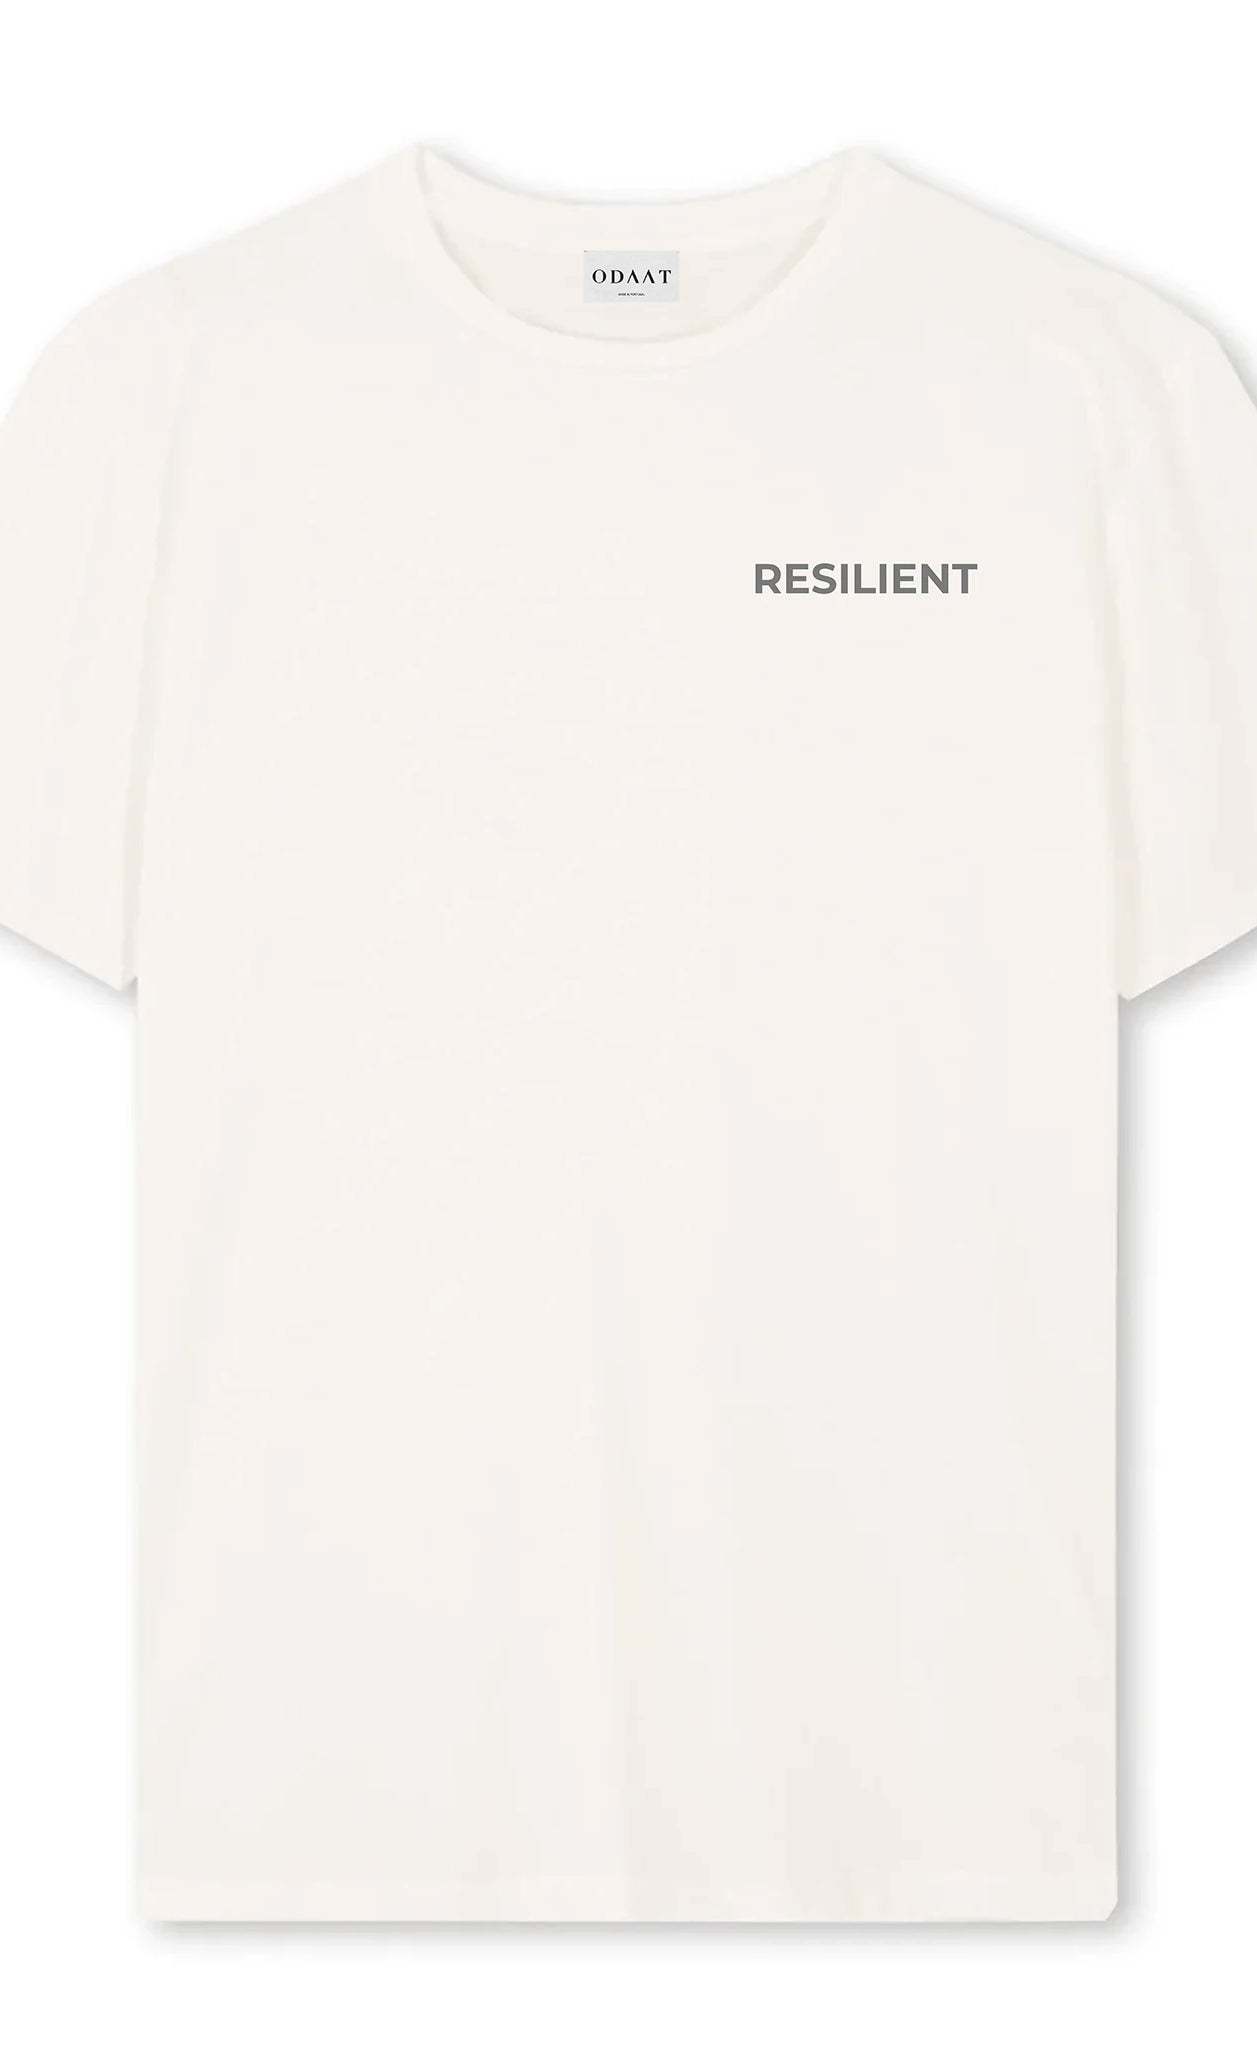 ODAAT Apparel, Resilient T-Shirt, Vintage White